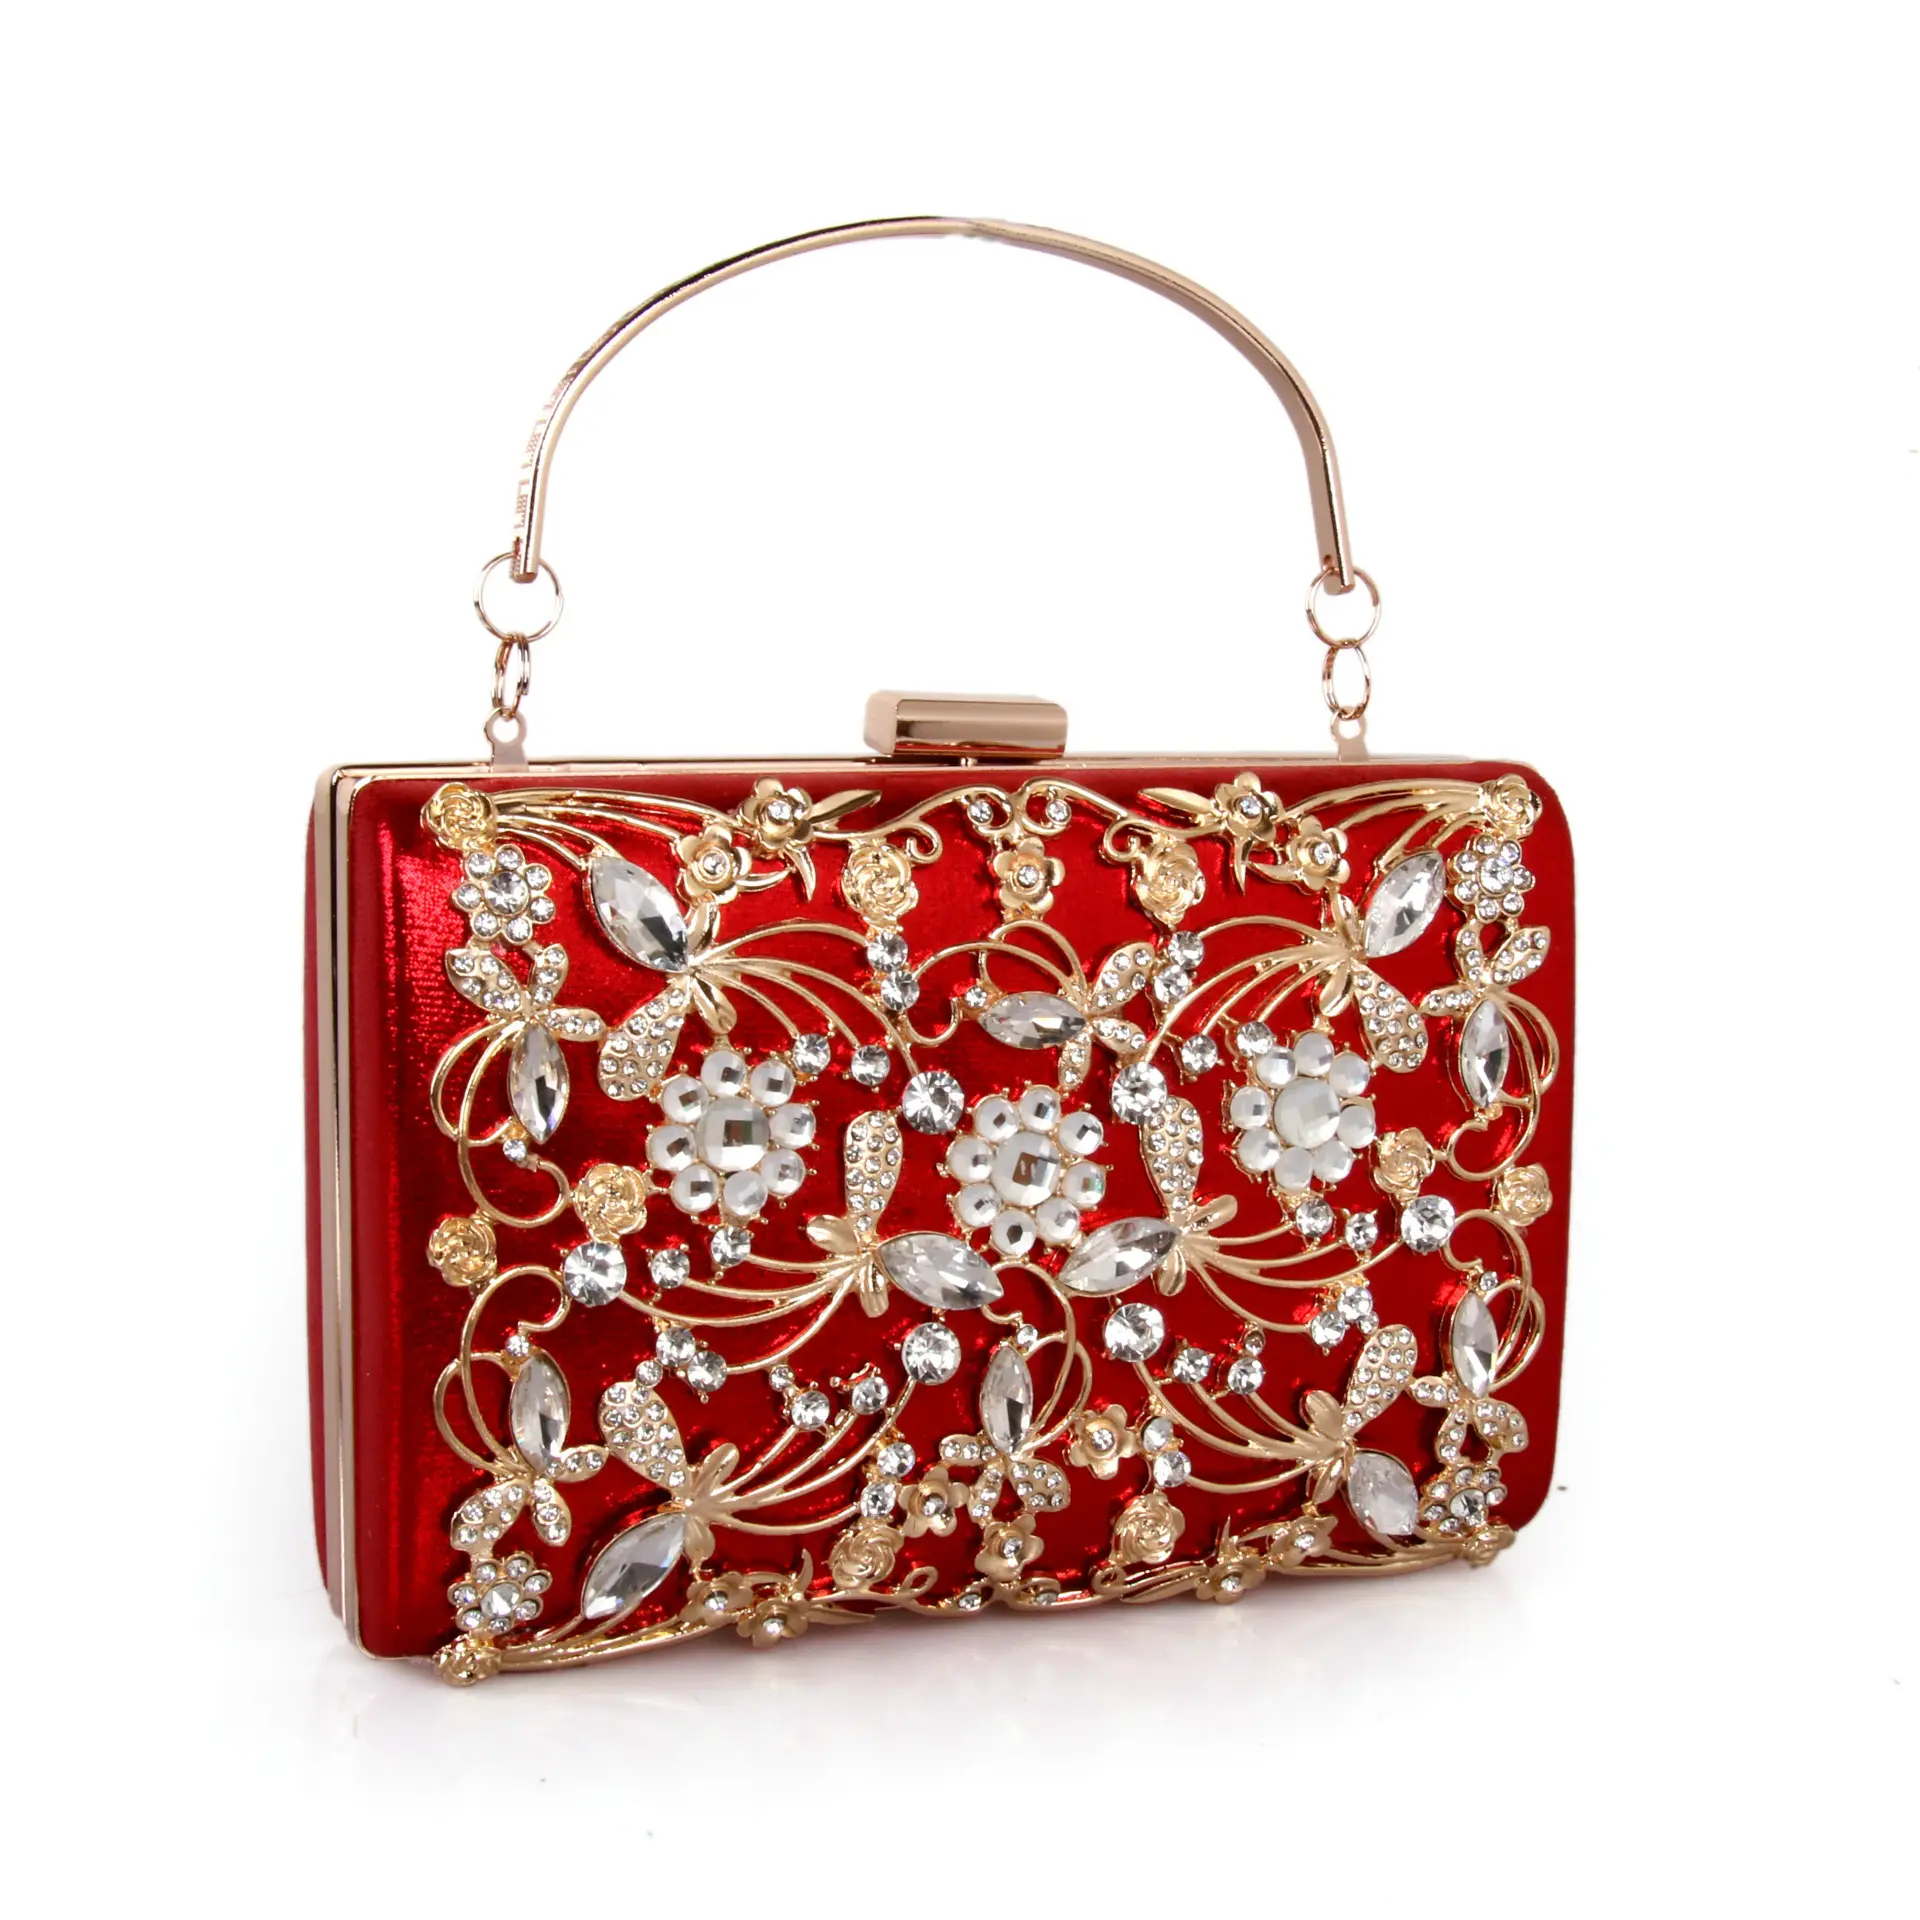 Talamone | Women's clutch bag in leather color red – Il Bisonte